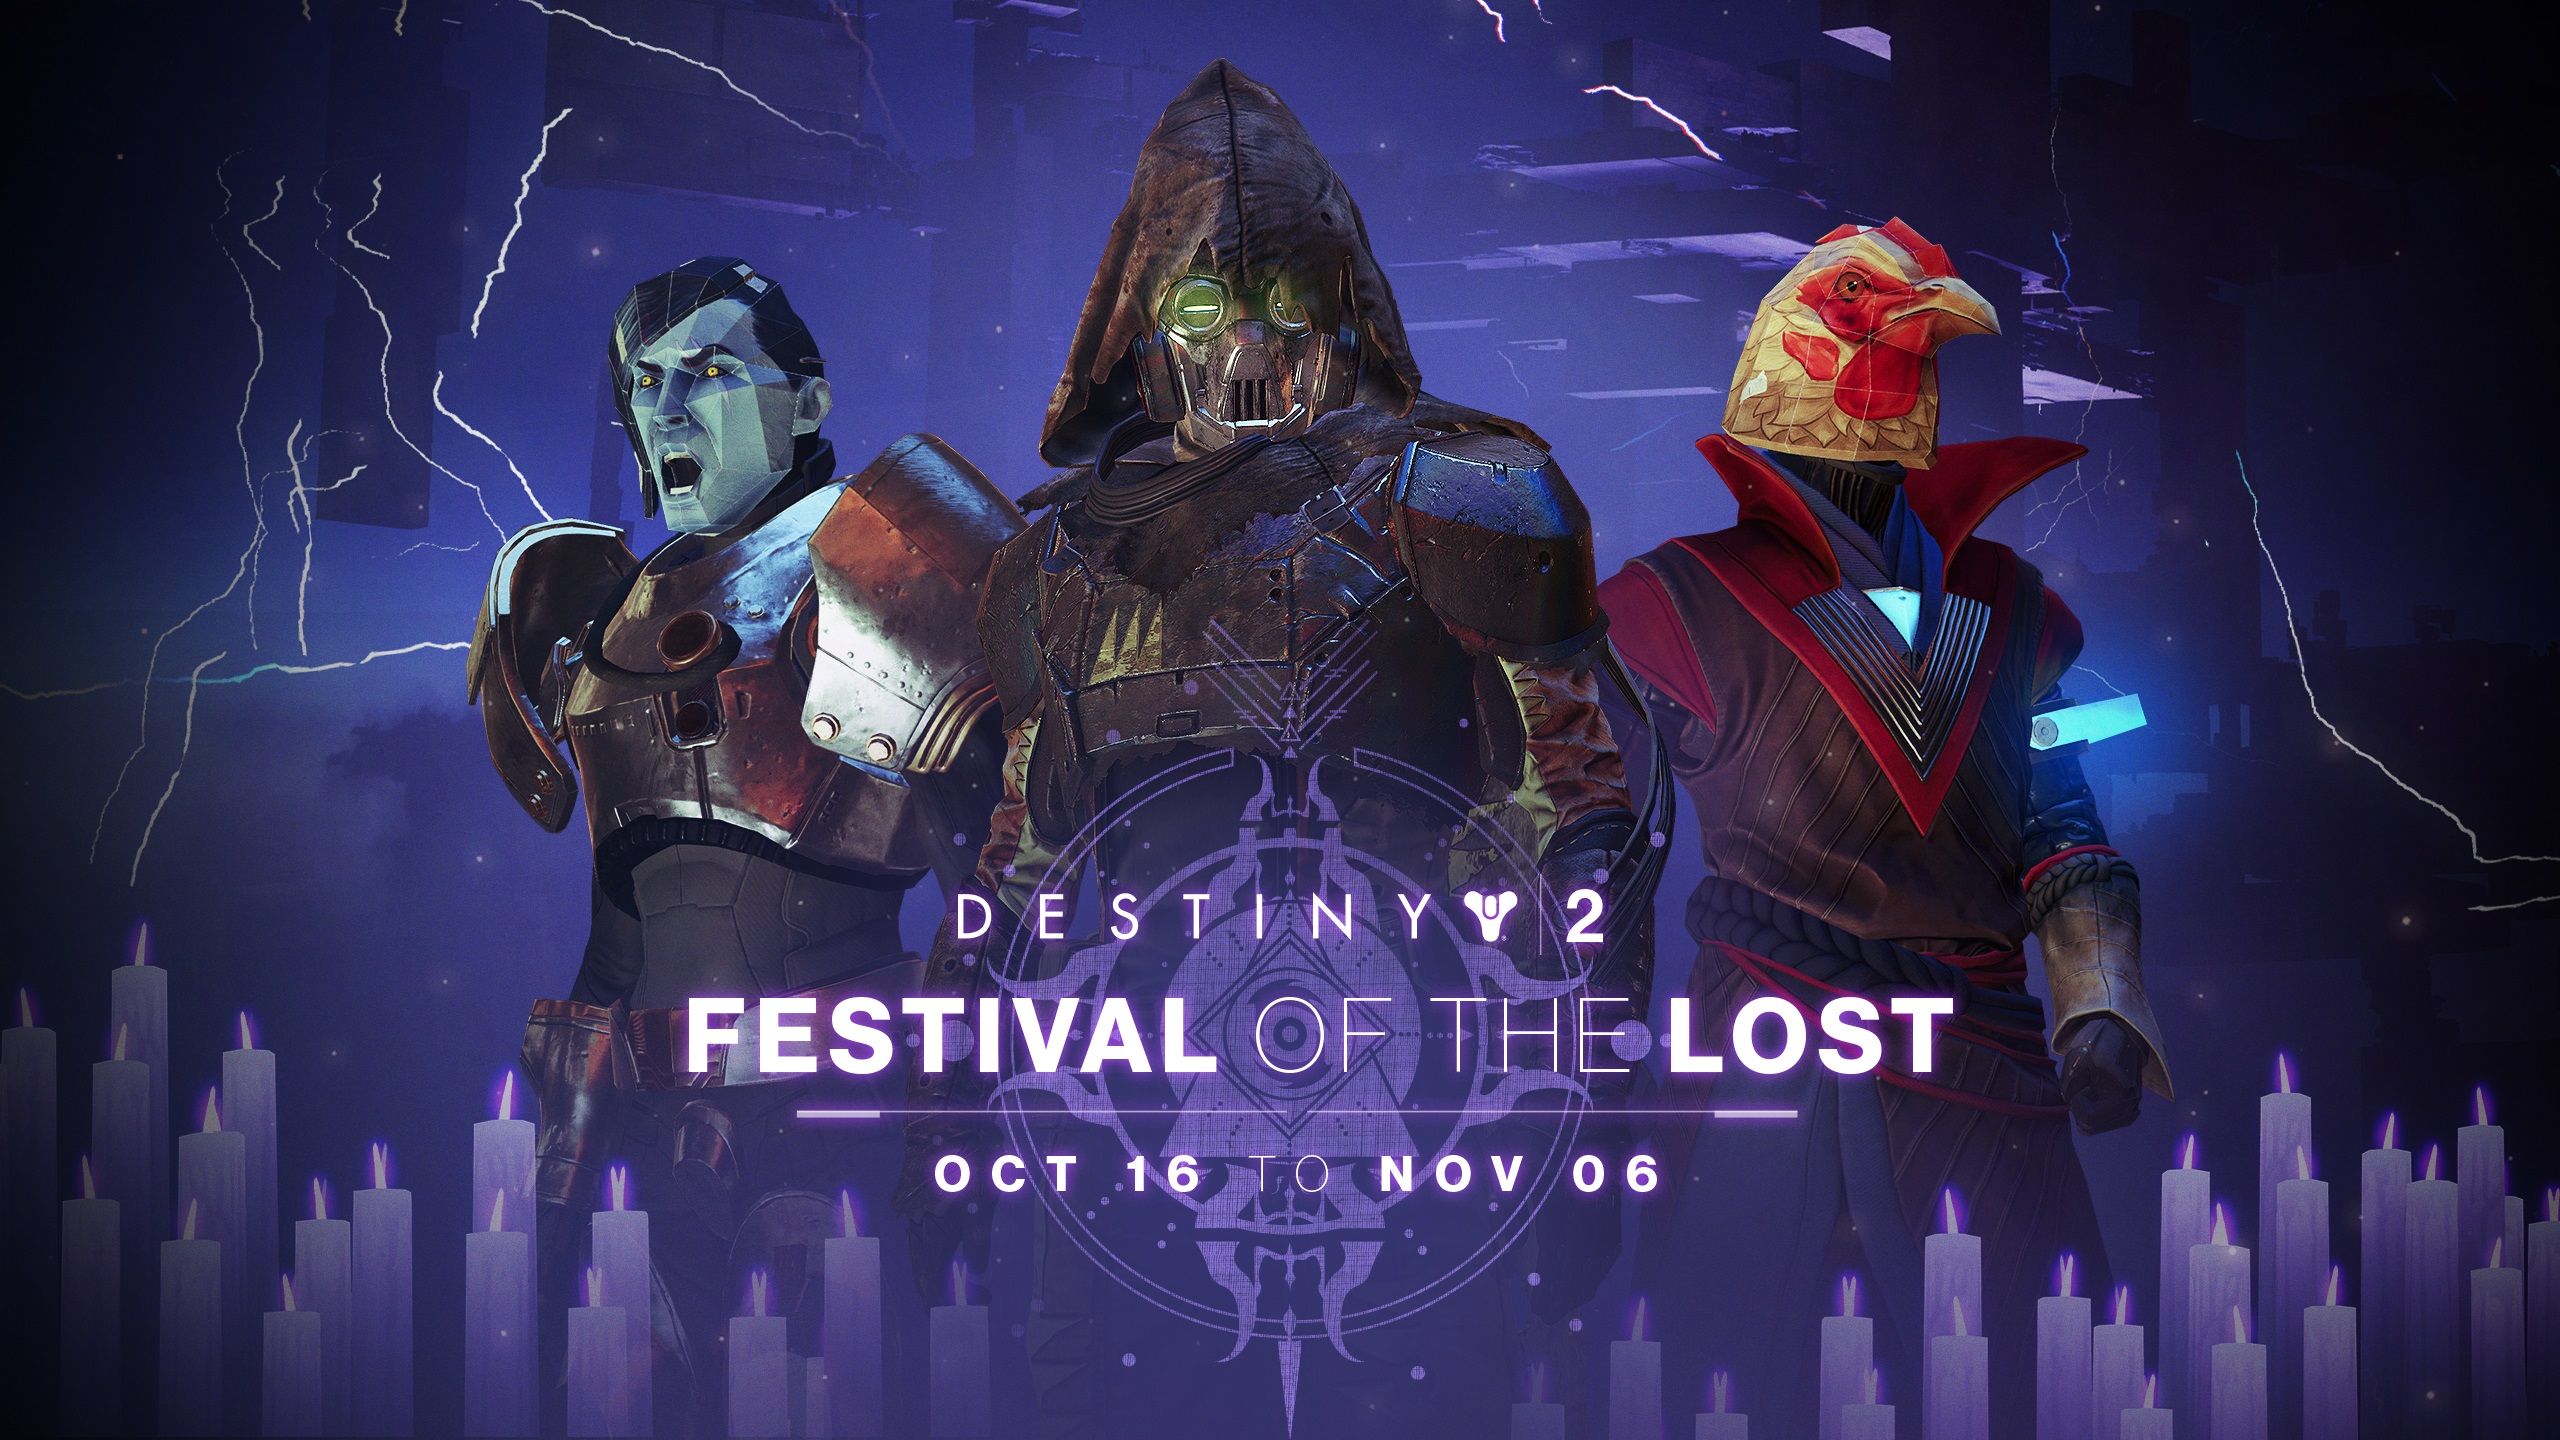 Destiny 2 Festival of the Lost event